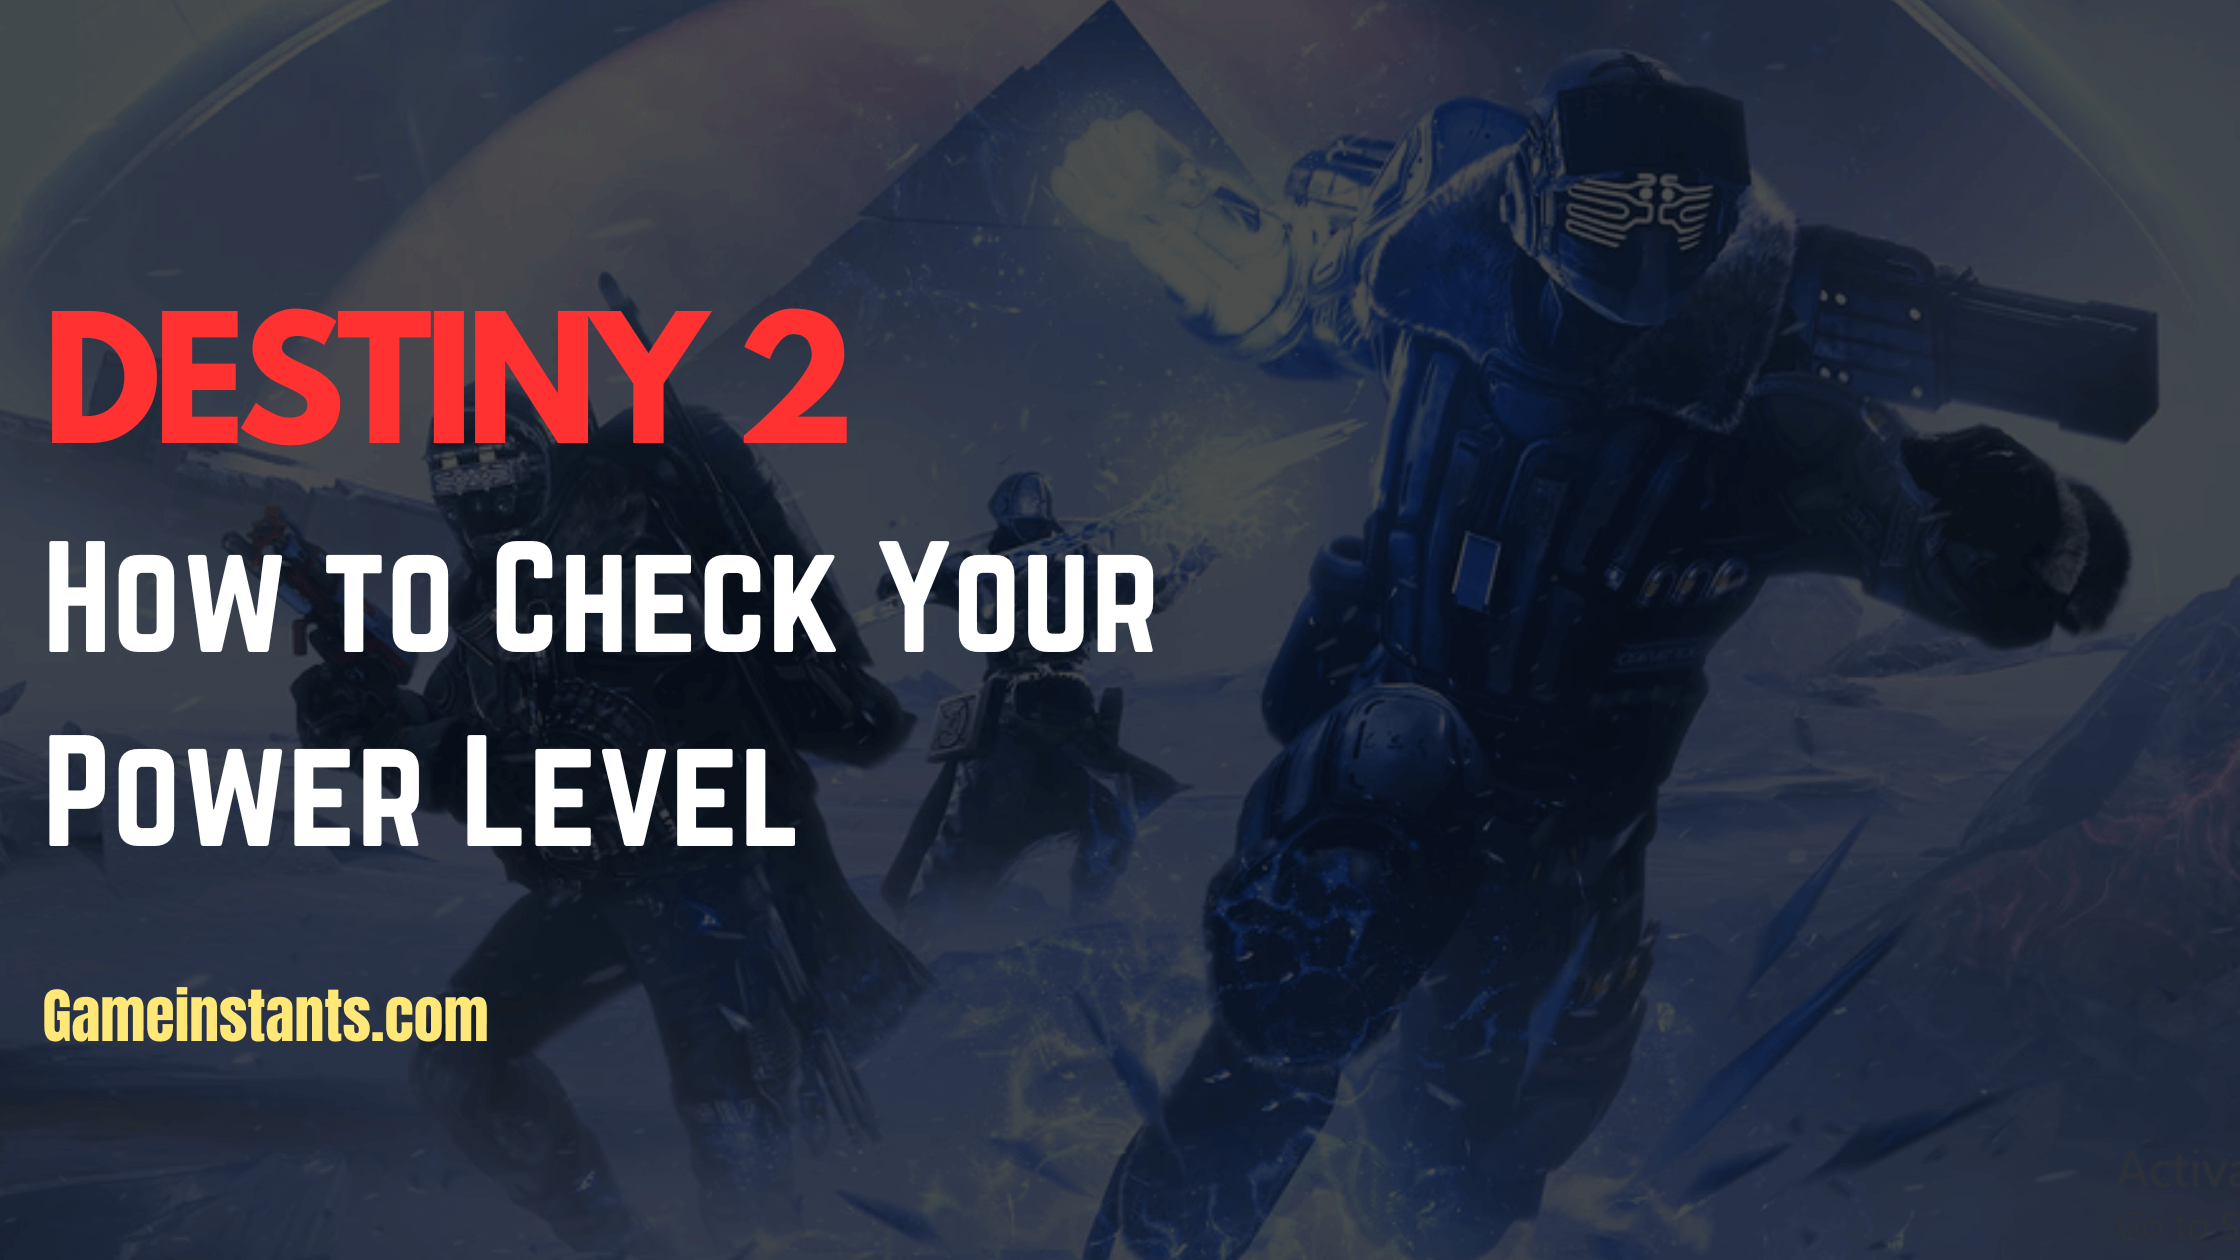 How To Check Power Level in Destiny 2